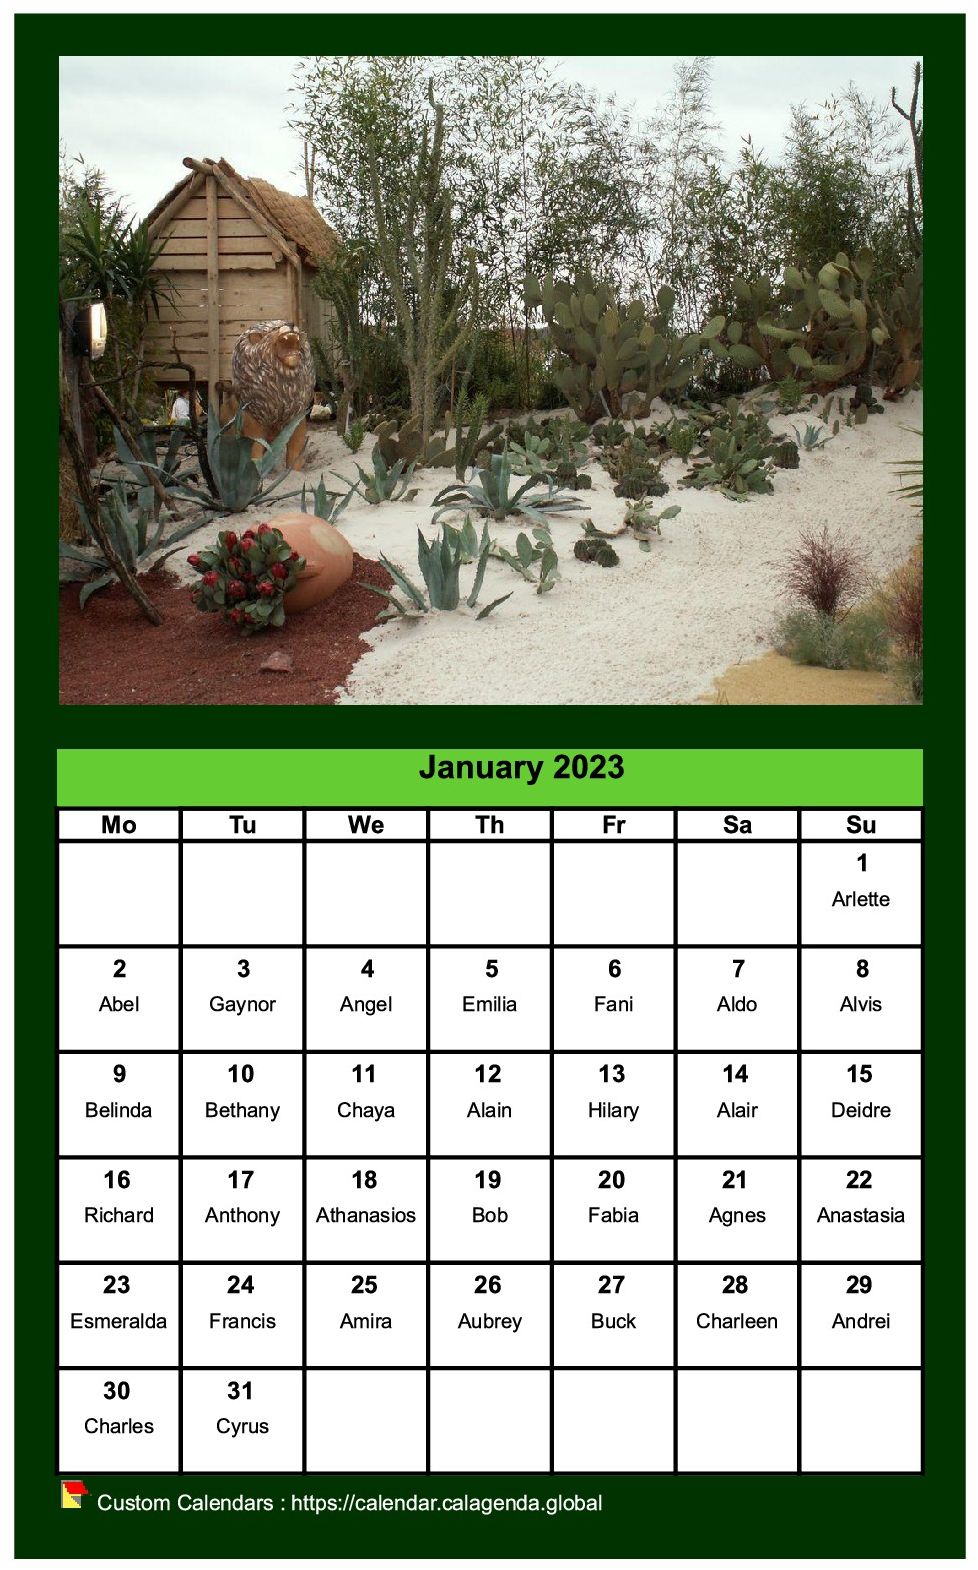 Calendar monthly 2023 with a different photo every month